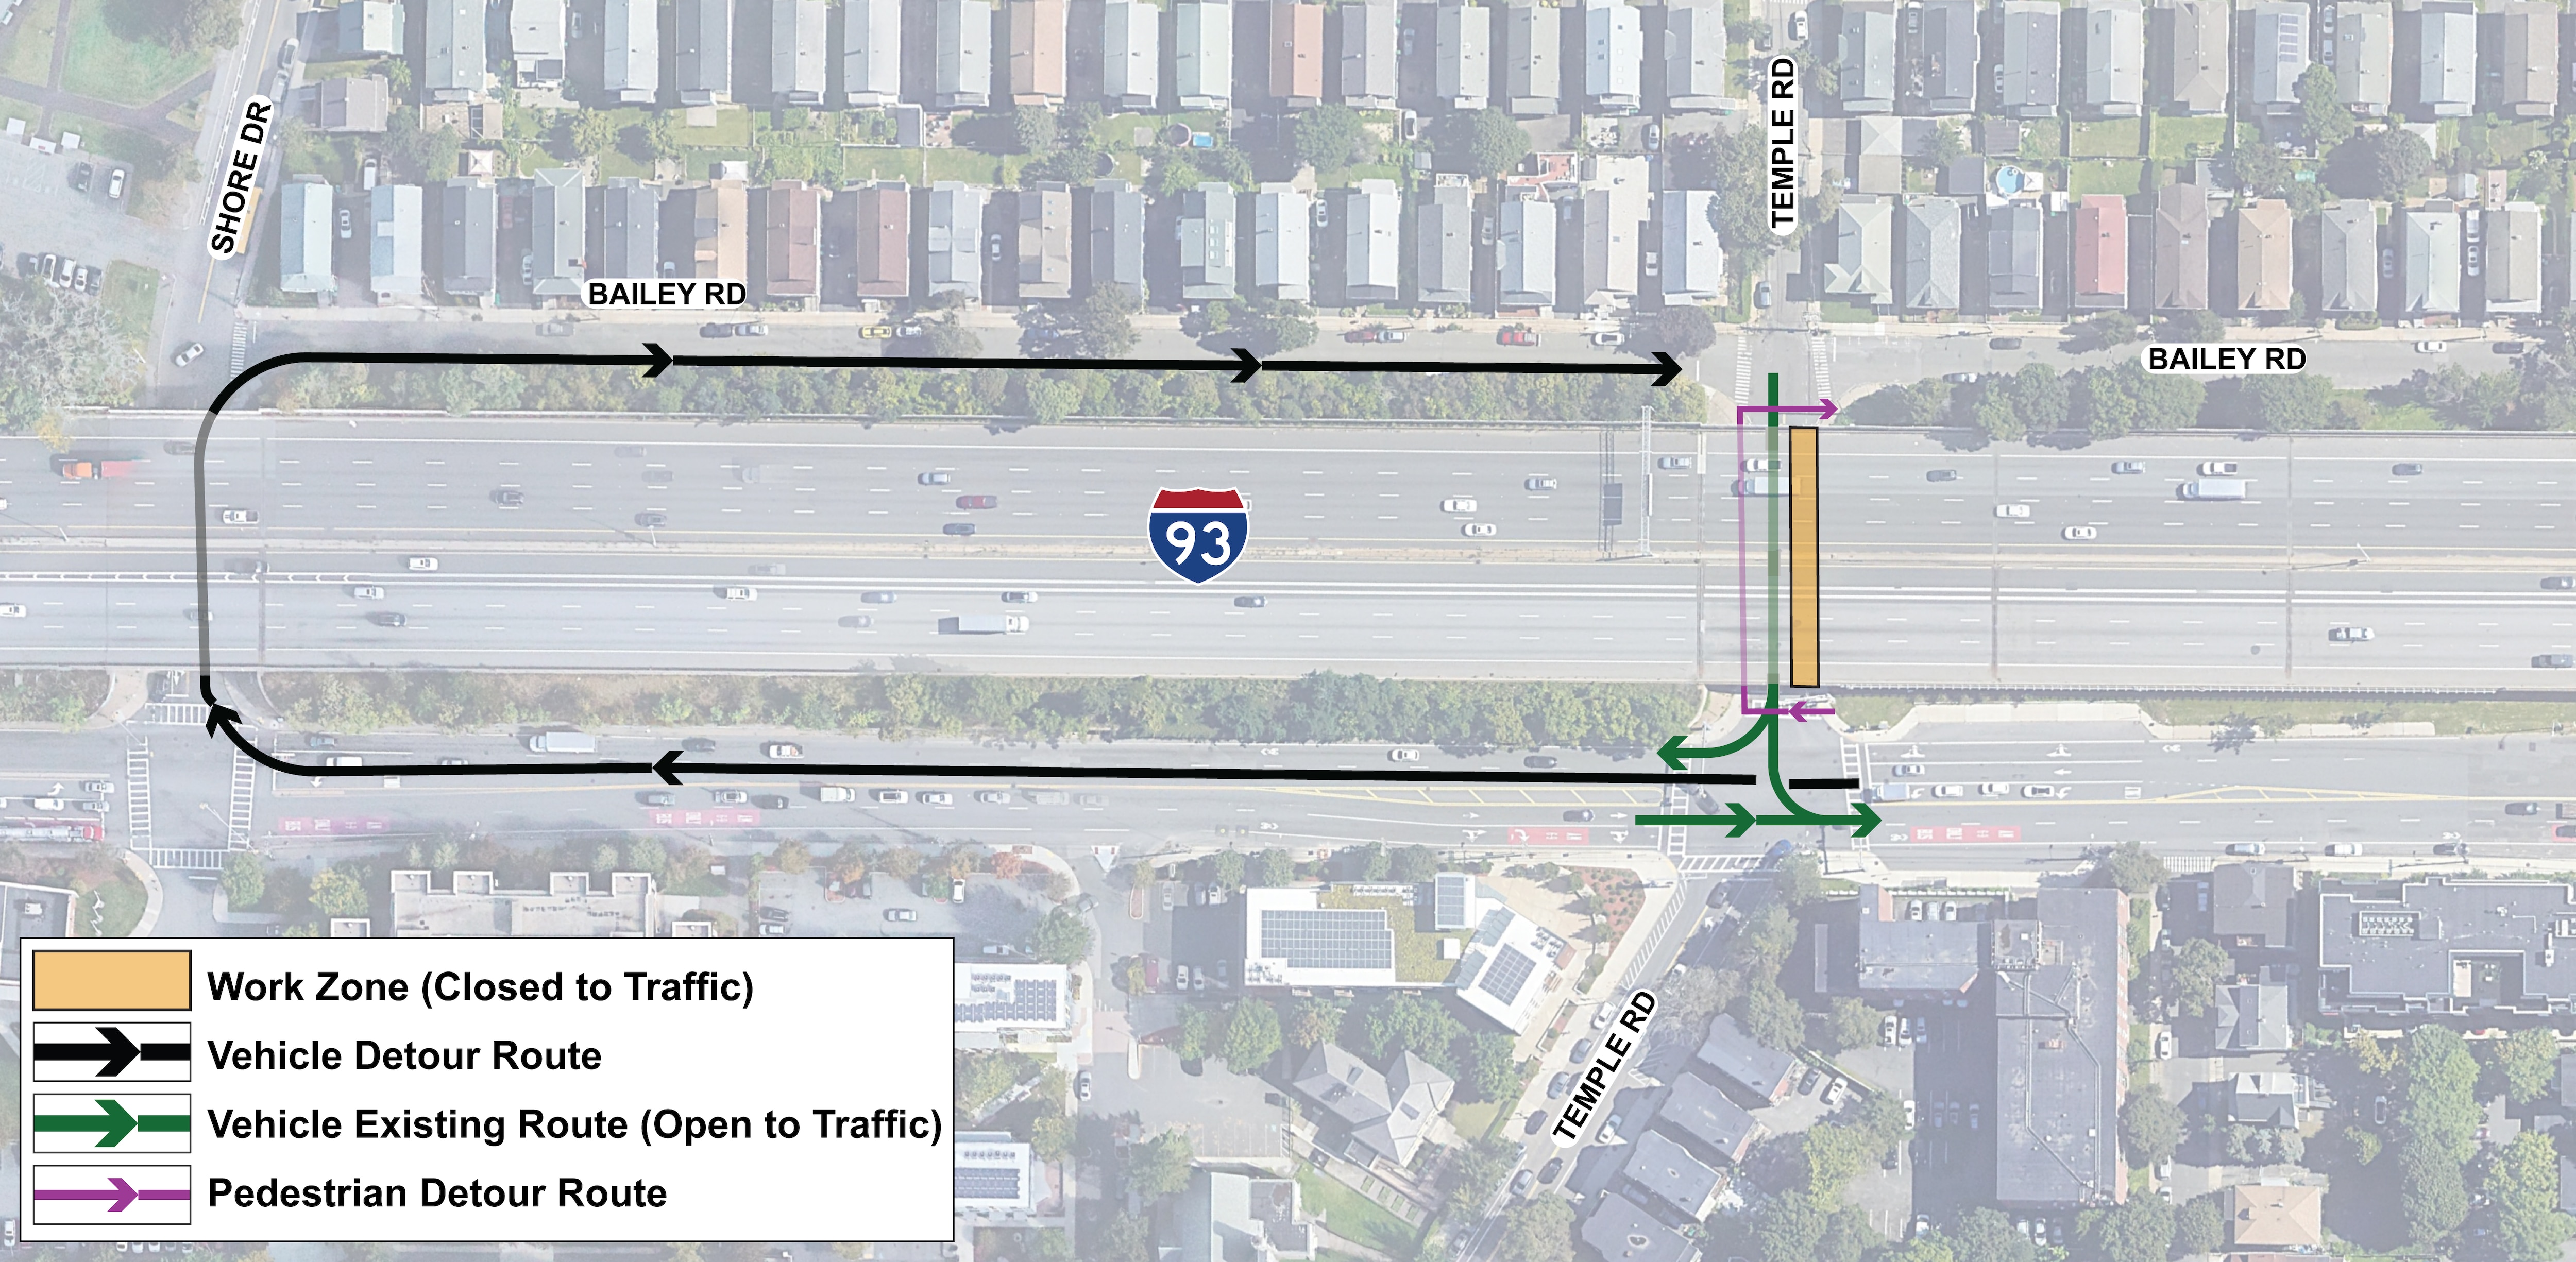  An aerial graphic showing the project location. The detour is depicted by an arrow going up Mystic Avenue, onto Shore Drive, and onto Bailey Road. The key reads, “work zone (closed to traffic), vehicle detour route, vehicle existing route (open to traffic), and pedestrian detour route.”